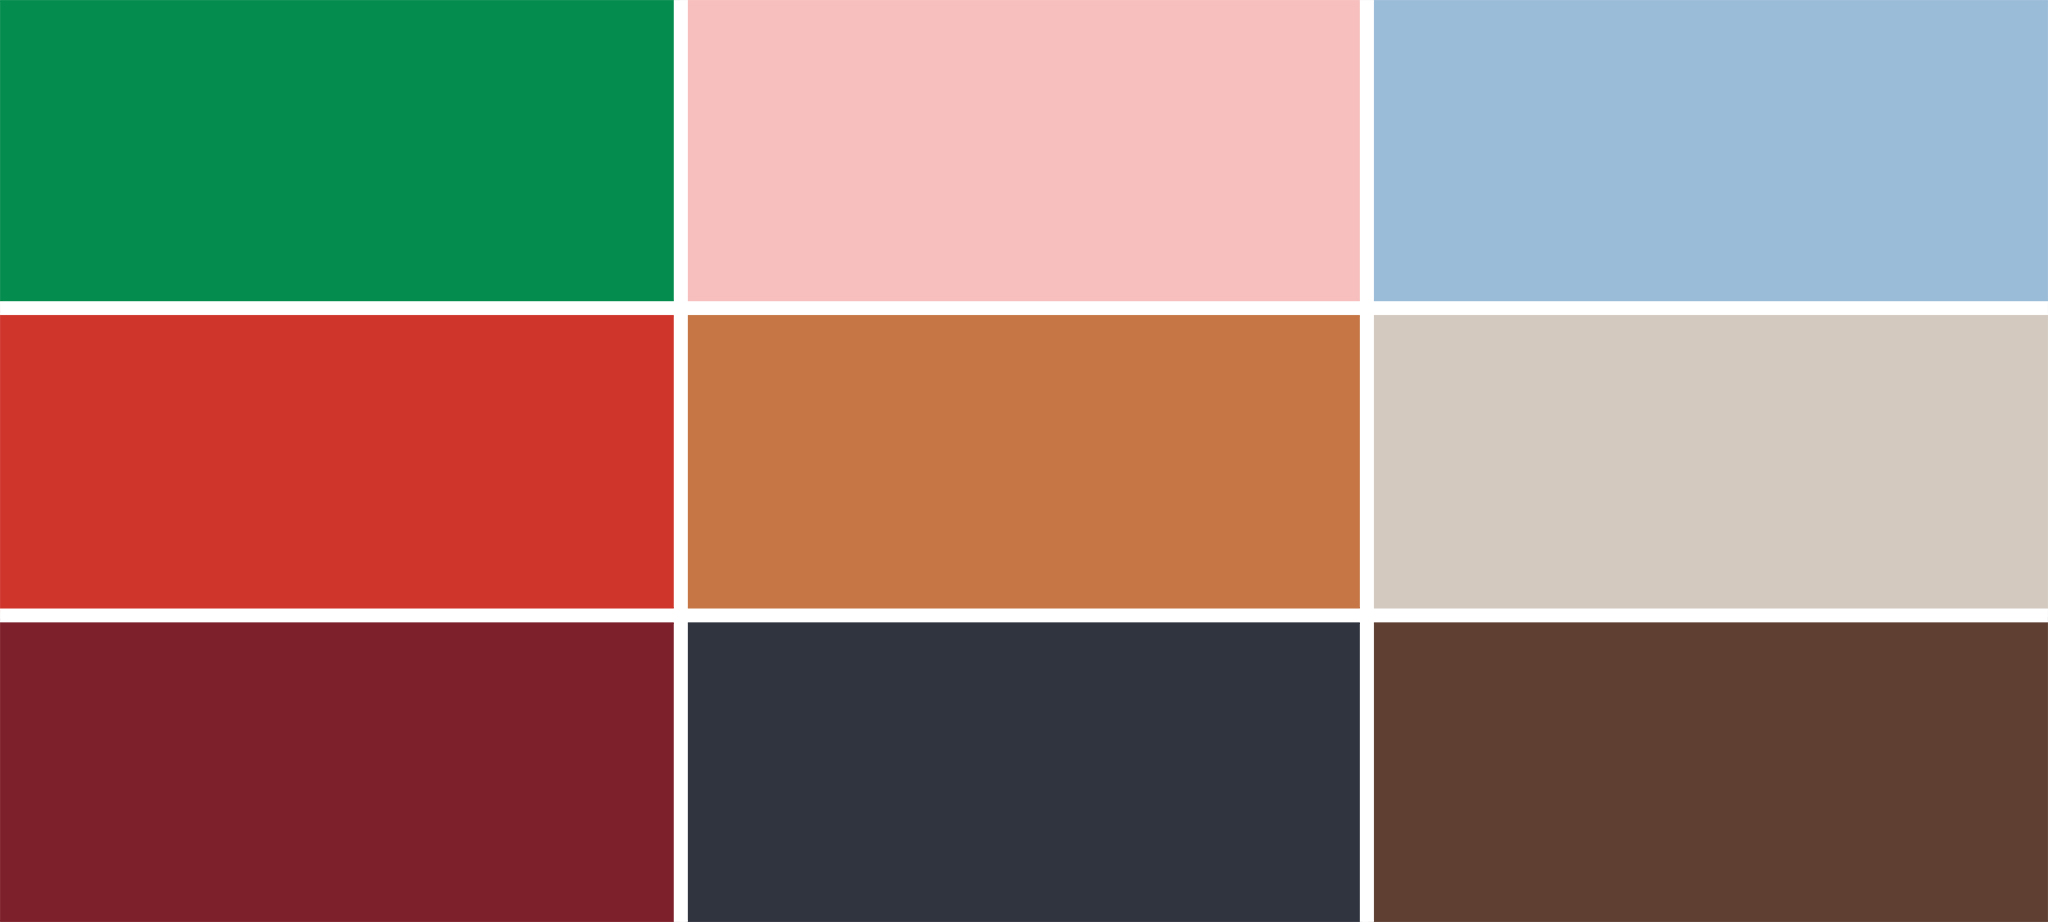 Pantone Fashion Color Trend Report Autumn/Winter 2021/2022 For New York  Fashion Week - Fashion Trendsetter